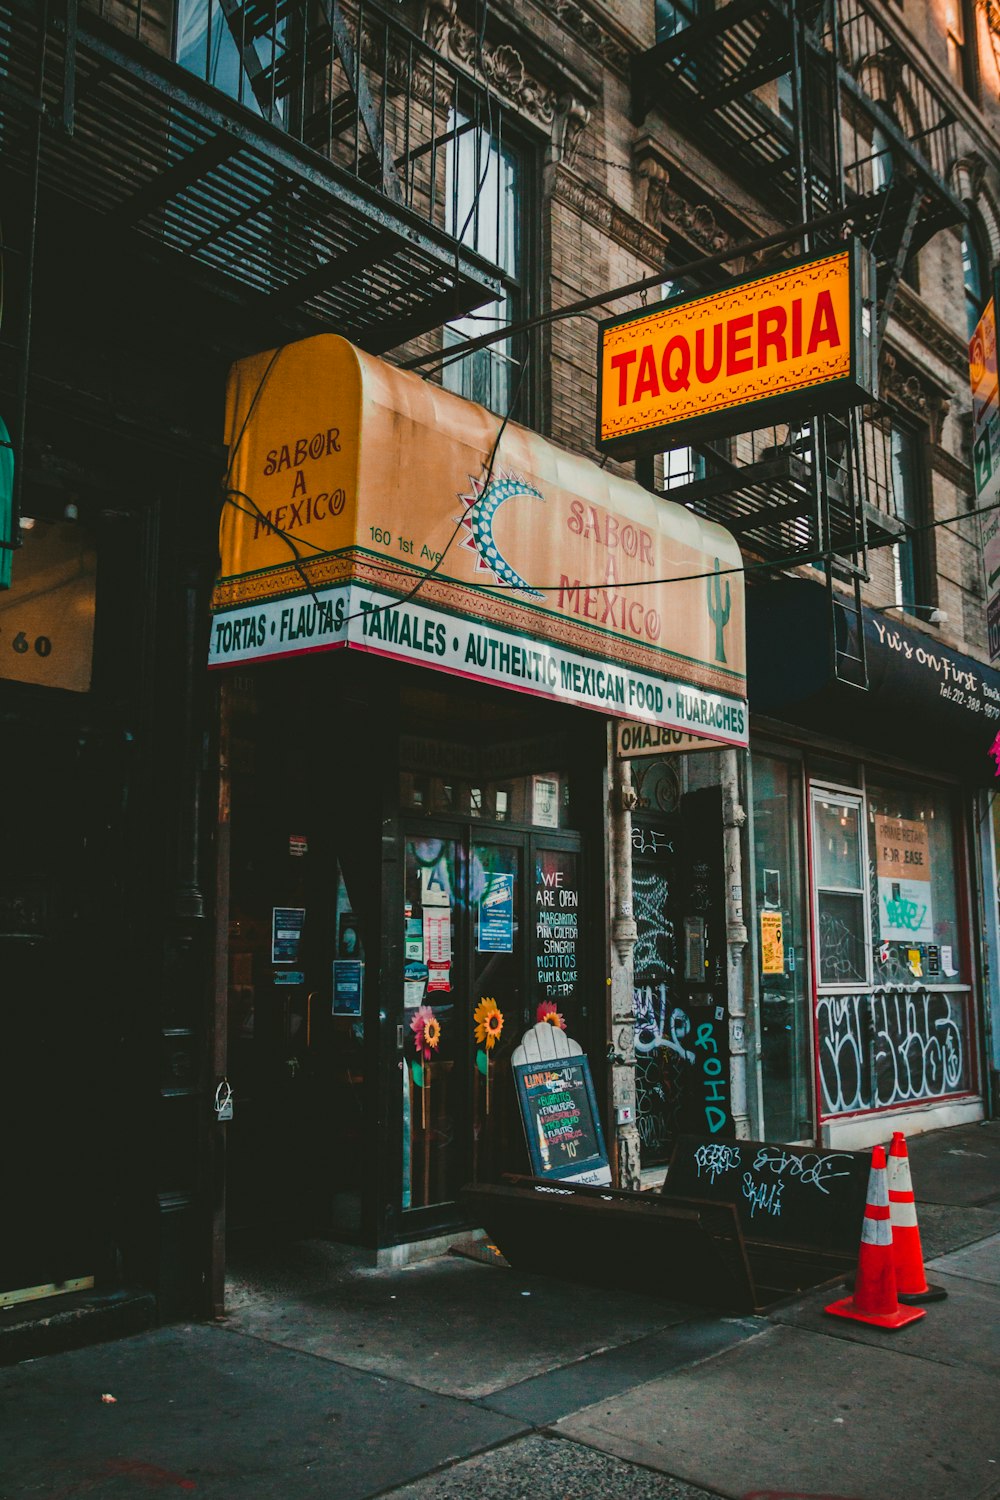 a building with a sign that says faqueria on it